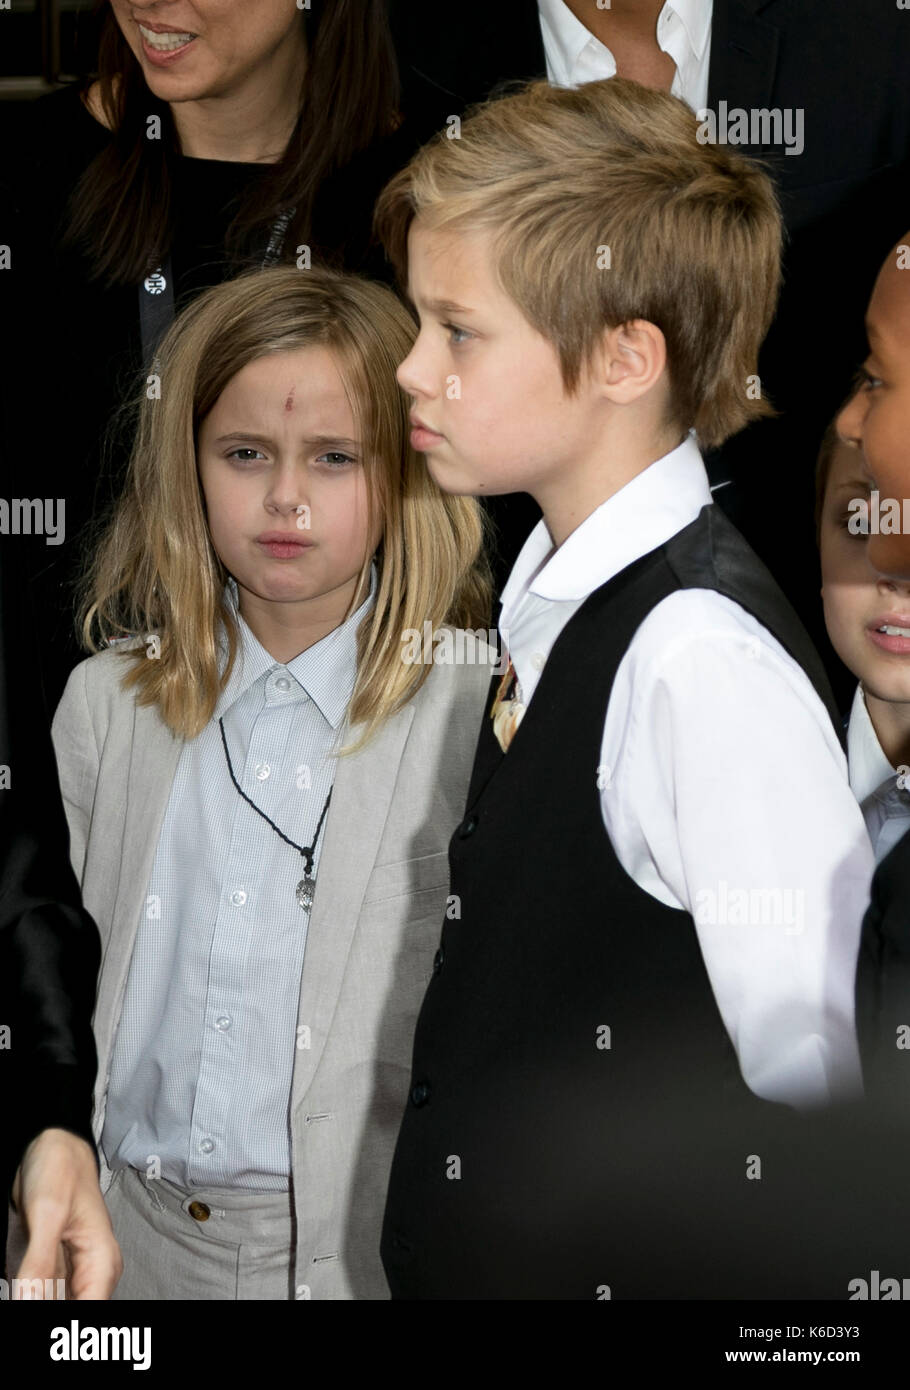 Toronto, Canada. 11th Sep, 2017. Vivienne Jolie-Pitt (l) and Shiloh Jolie-Pitt attend the premiere of 'First They Killed My Father' during the 42nd Toronto International Film Festival, tiff, at Princess of Wales Theatre in Toronto, Canada, on 11 September 2017. · NO WIRE SERVICE · Photo: Hubert Boesl/dpa/Alamy Live News Stock Photo